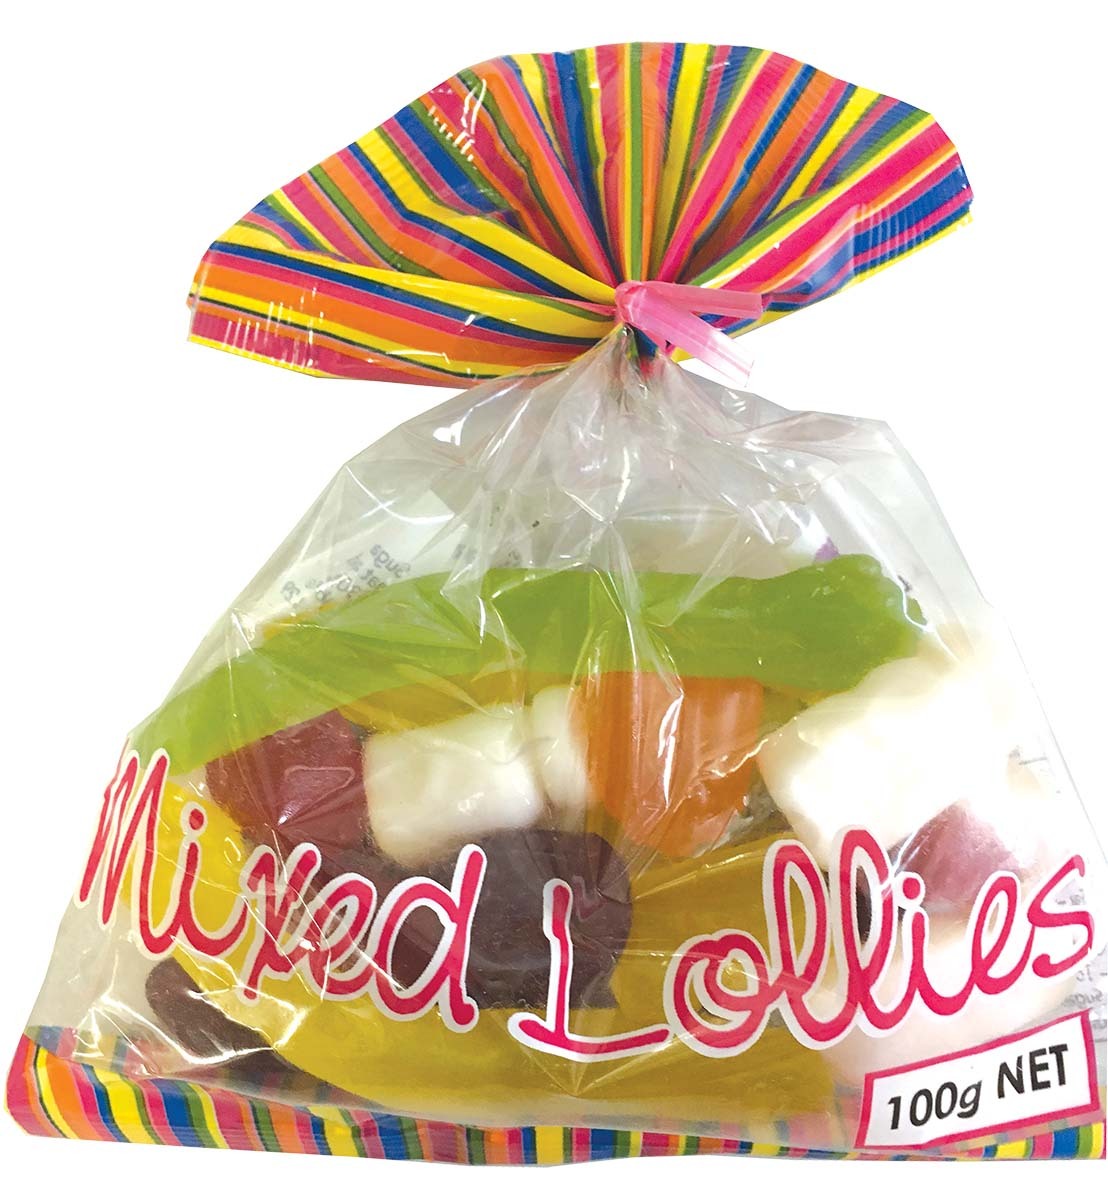 Mixed Lollies Mini Bags carton of 20 x 100g Lolly bags